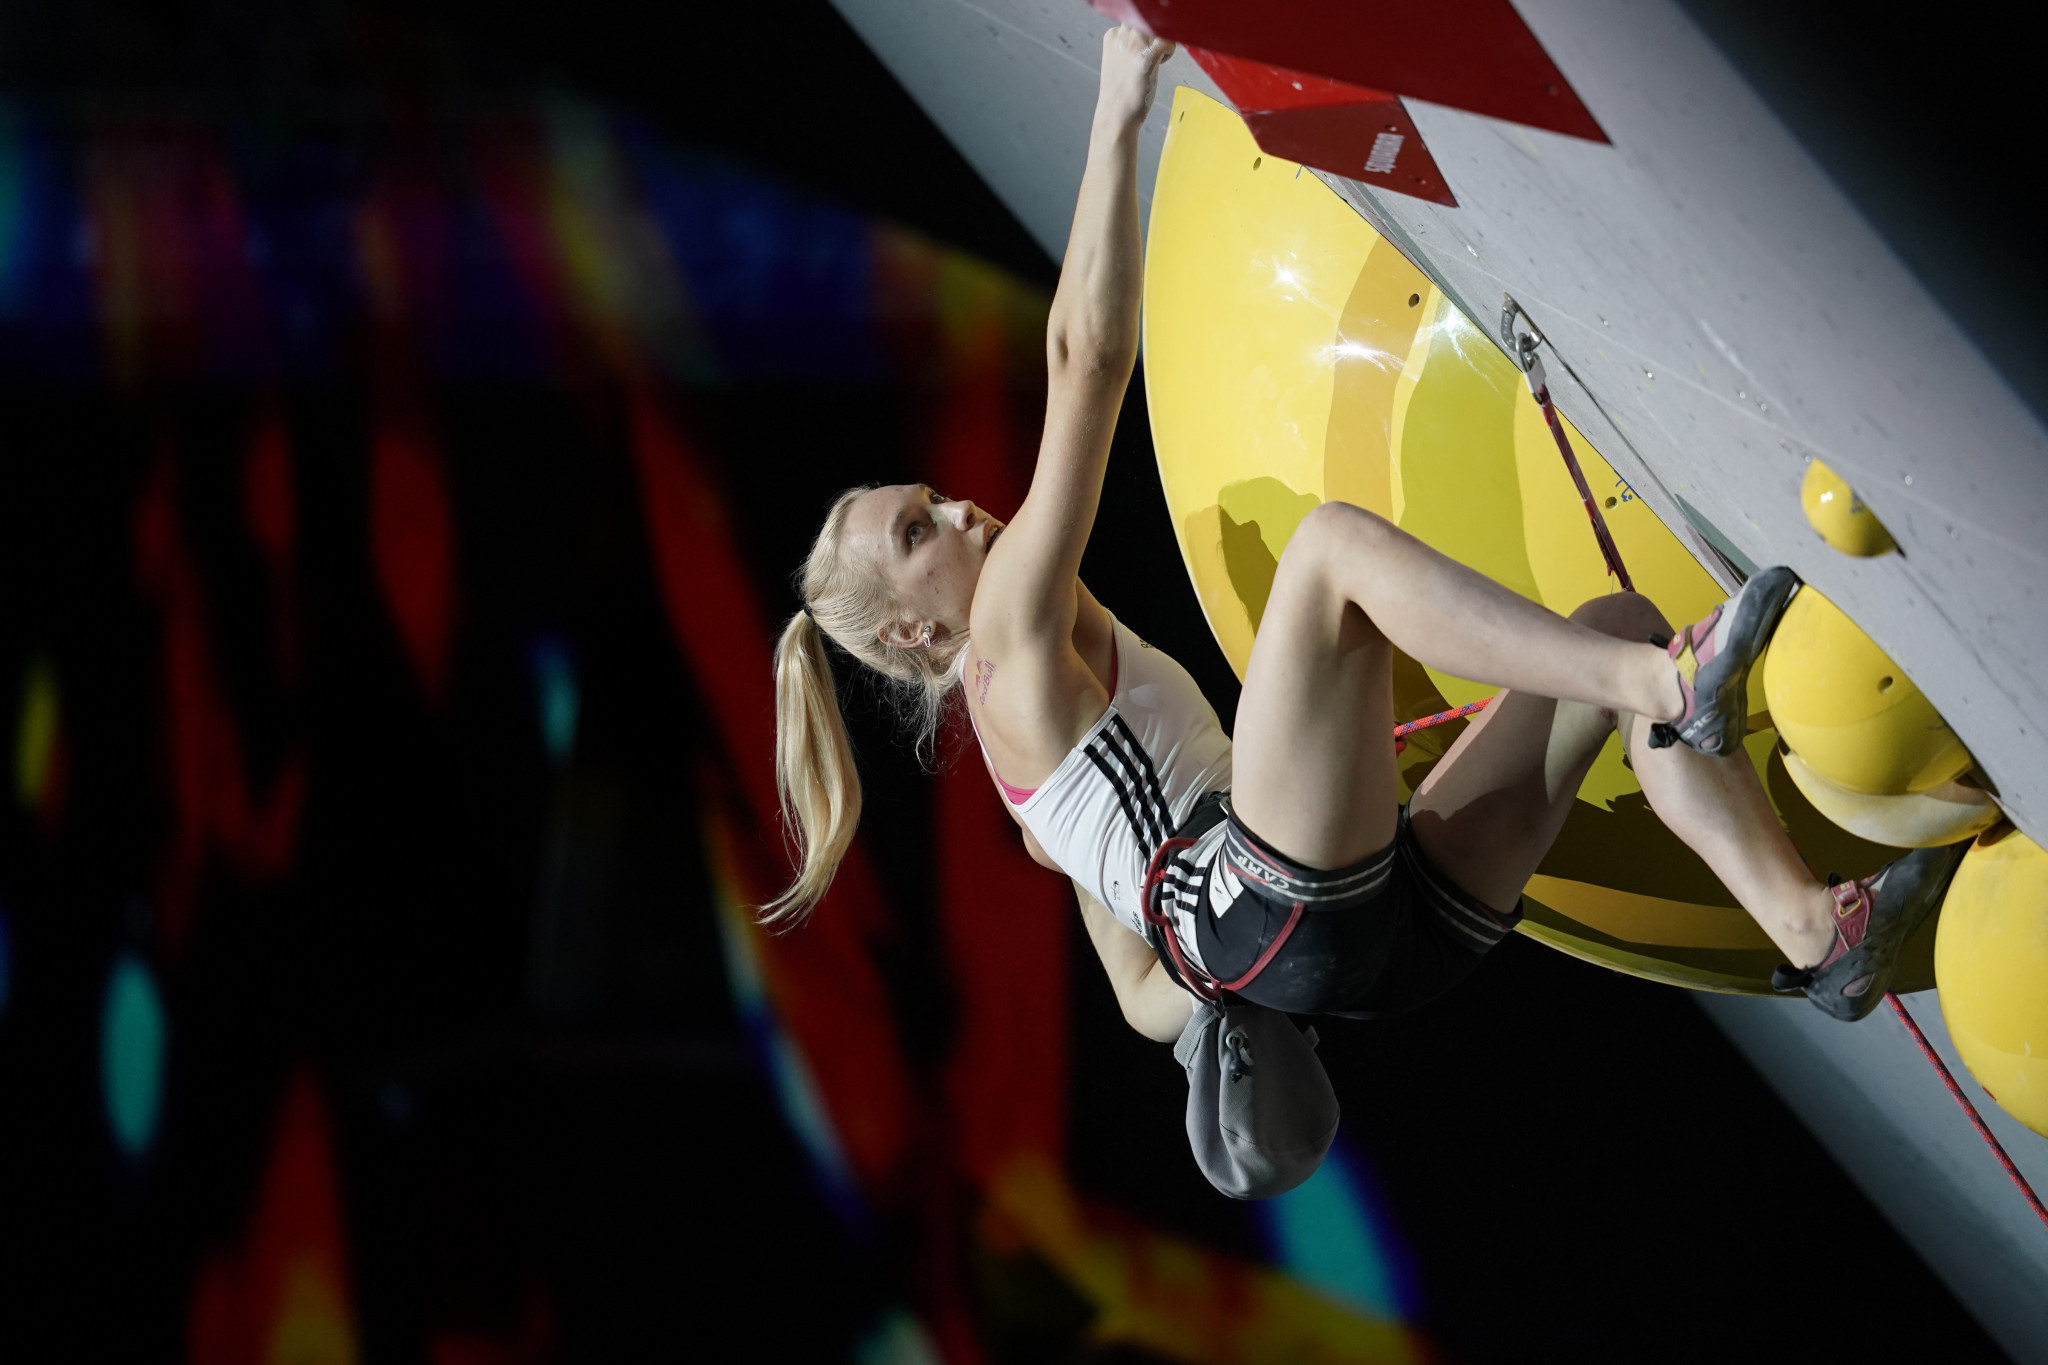 World lead champion Garnbret second in qualifying at IFSC World Cup in Kranj 